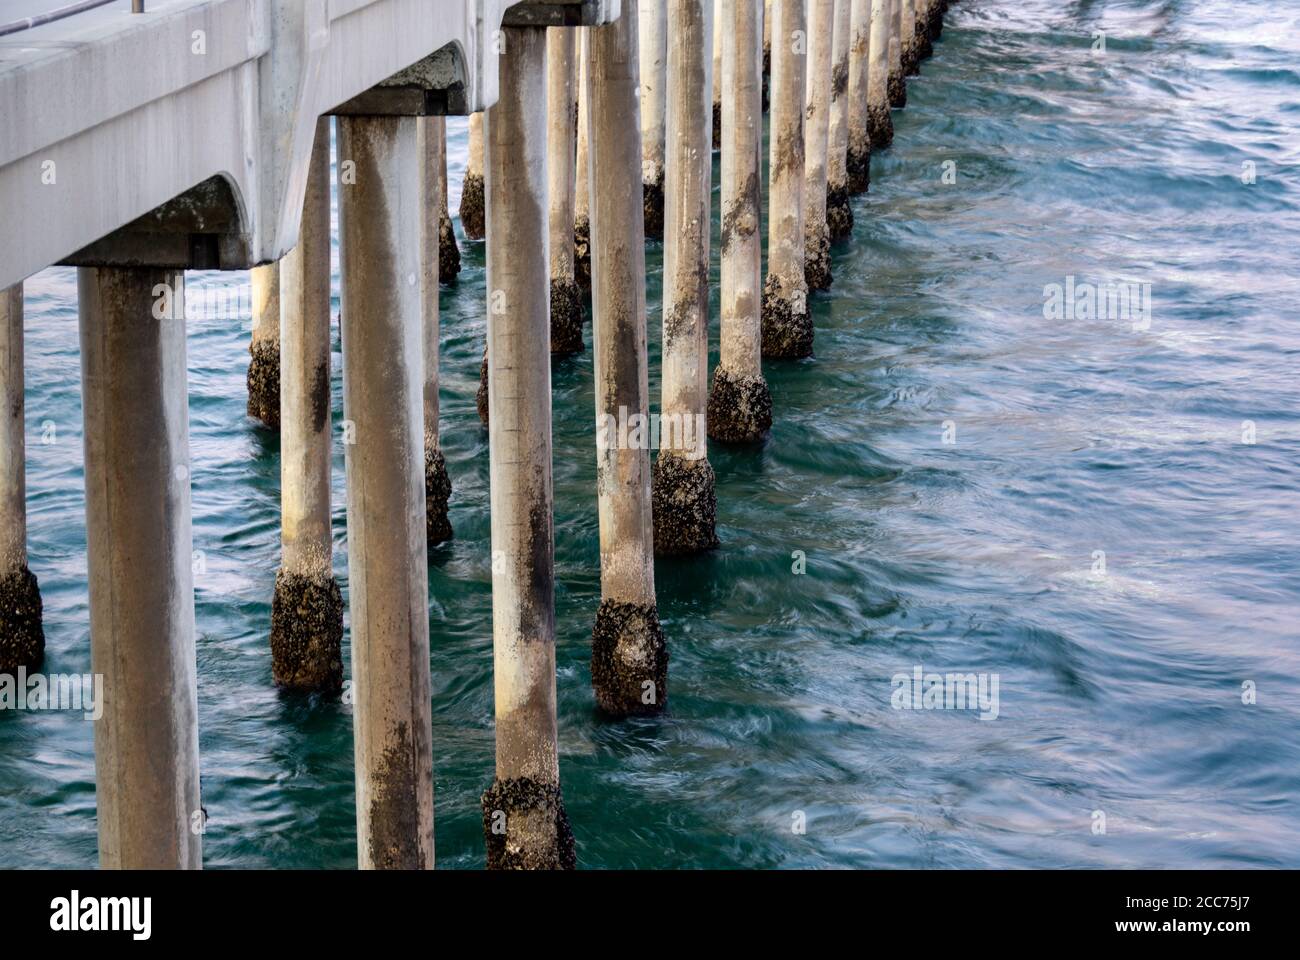 Ocean waves lapping at the concrete pilings of the Huntington Beach Pier, with exposed barnacles, at sunset in Huntington Beach, CA. Stock Photo